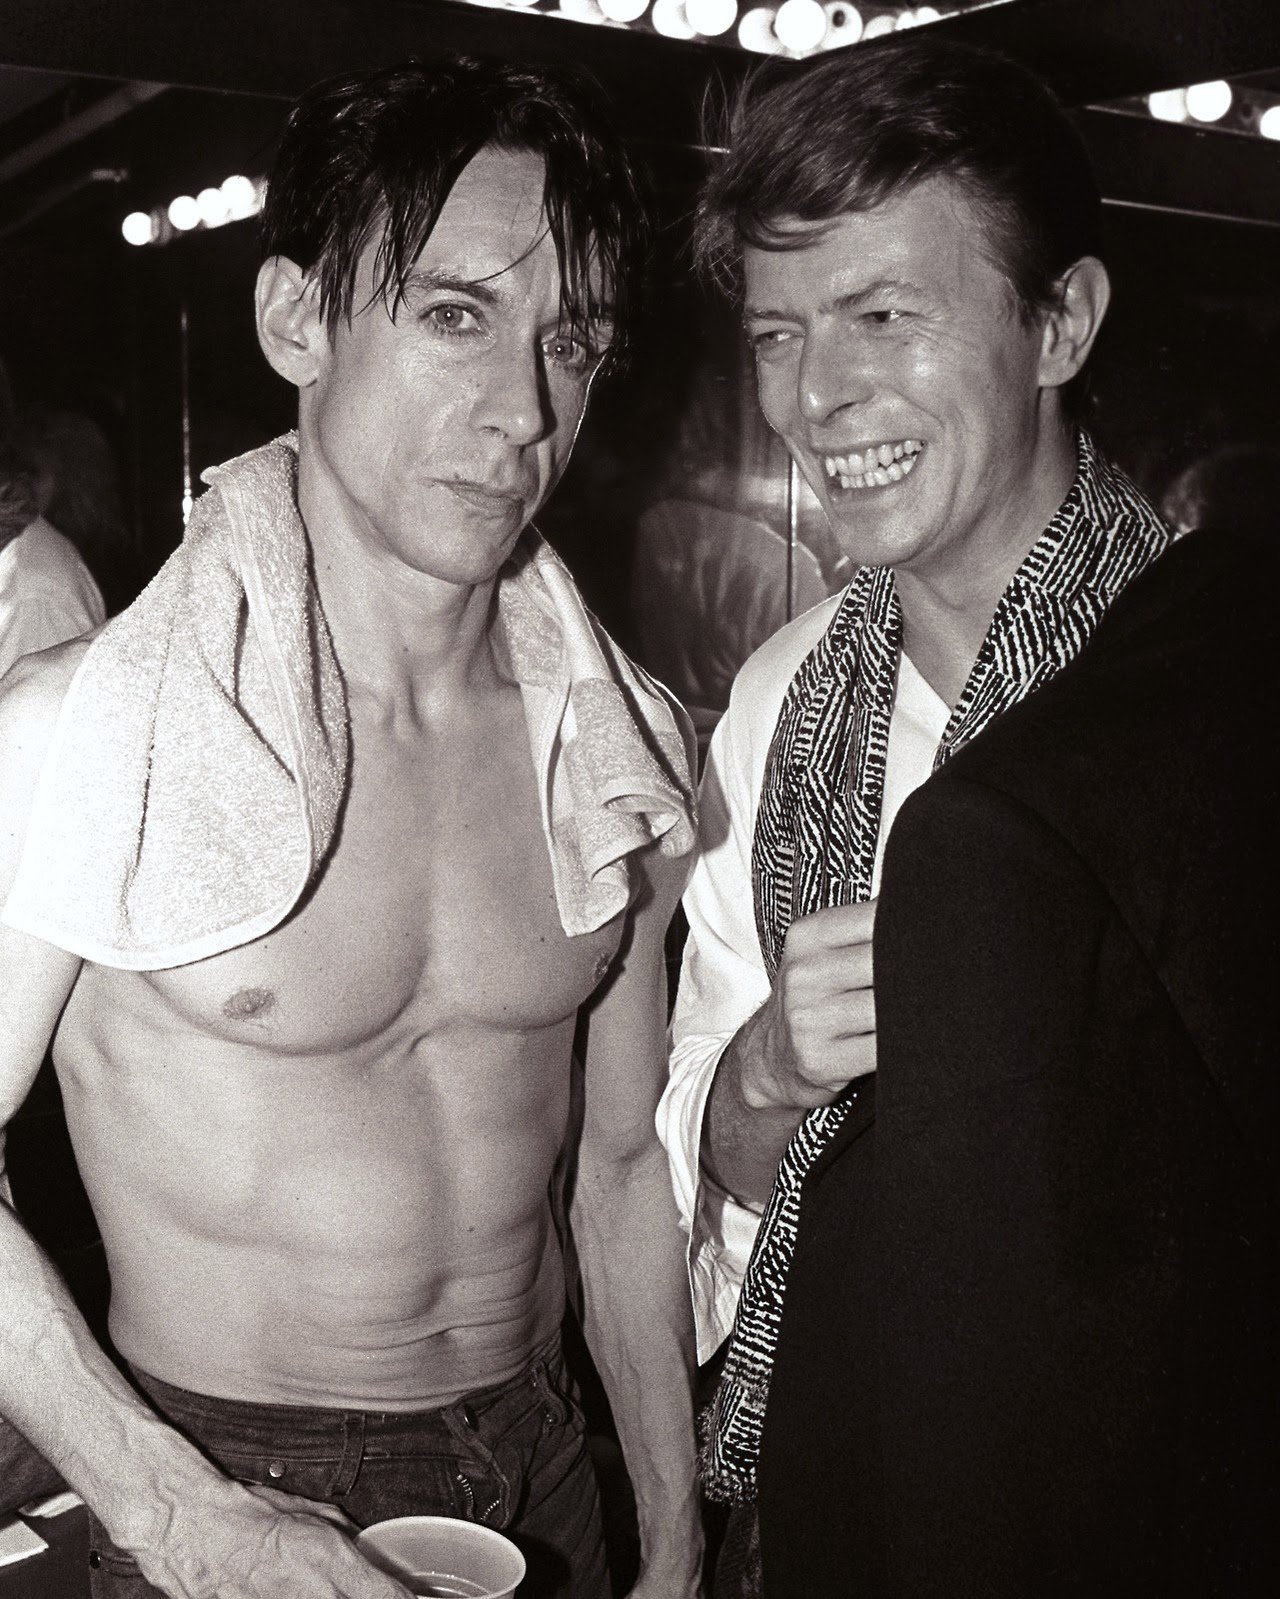 David-Bowie-and-Iggy-Pop-in-the-1970s-11